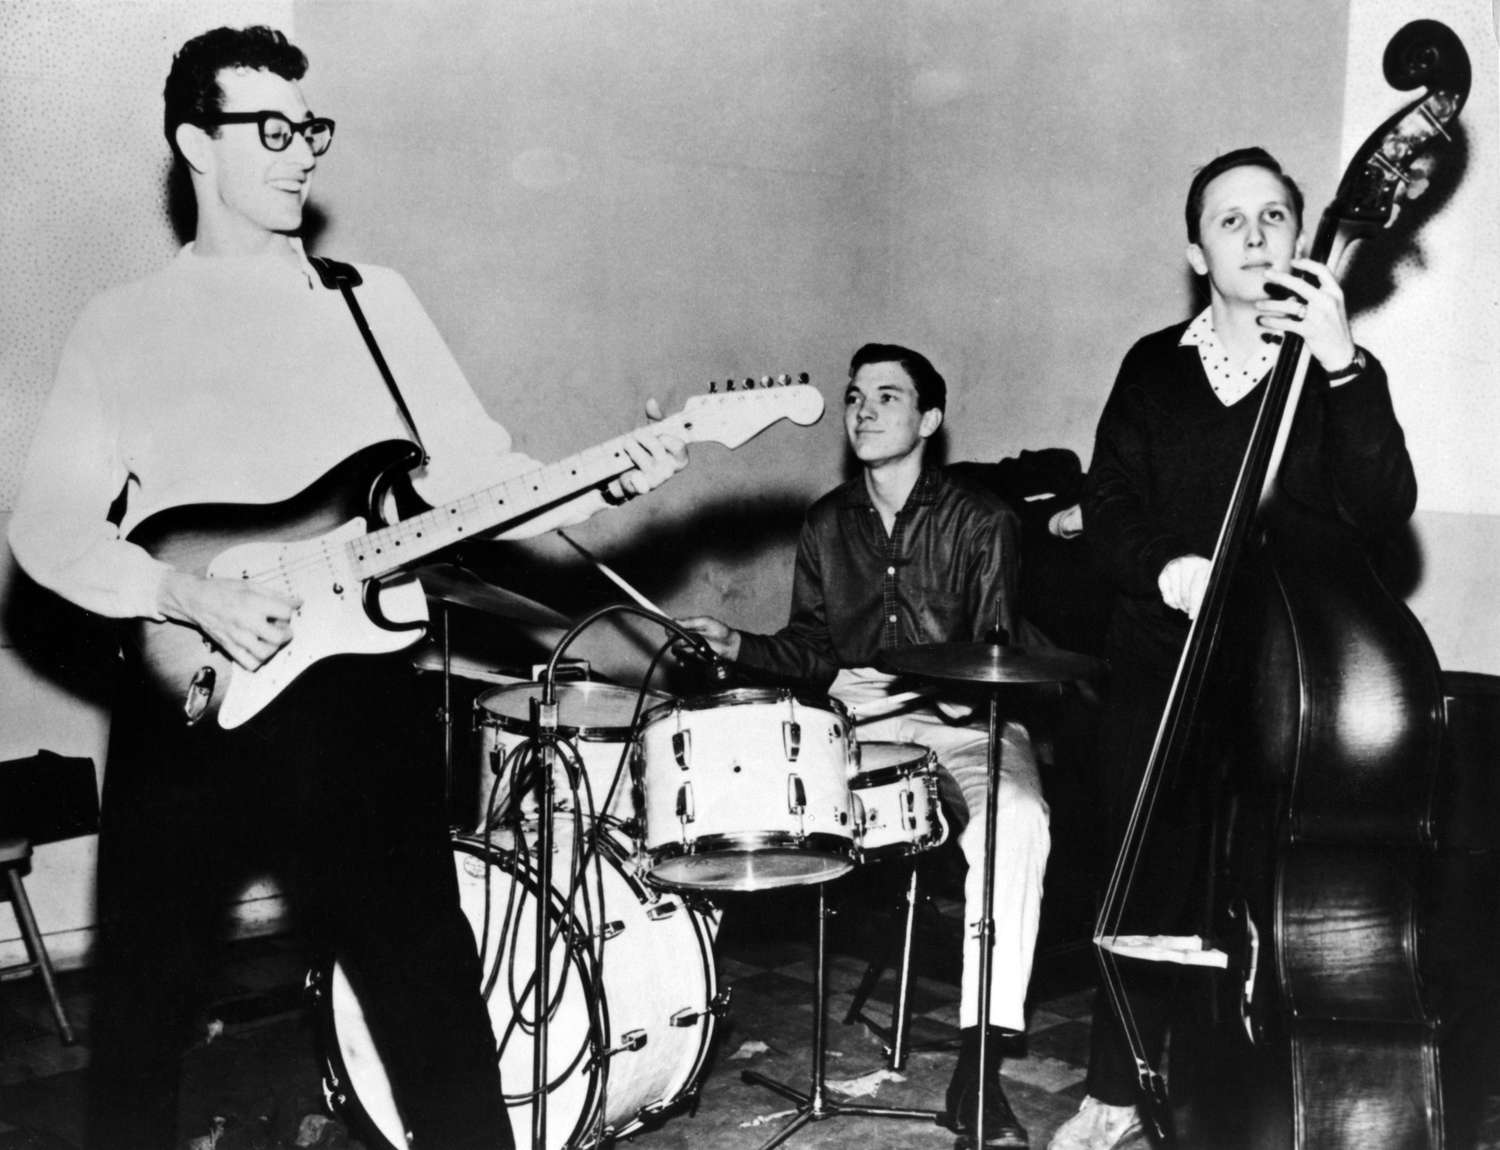 What Happened to Buddy Holly's Crickets After He Died?